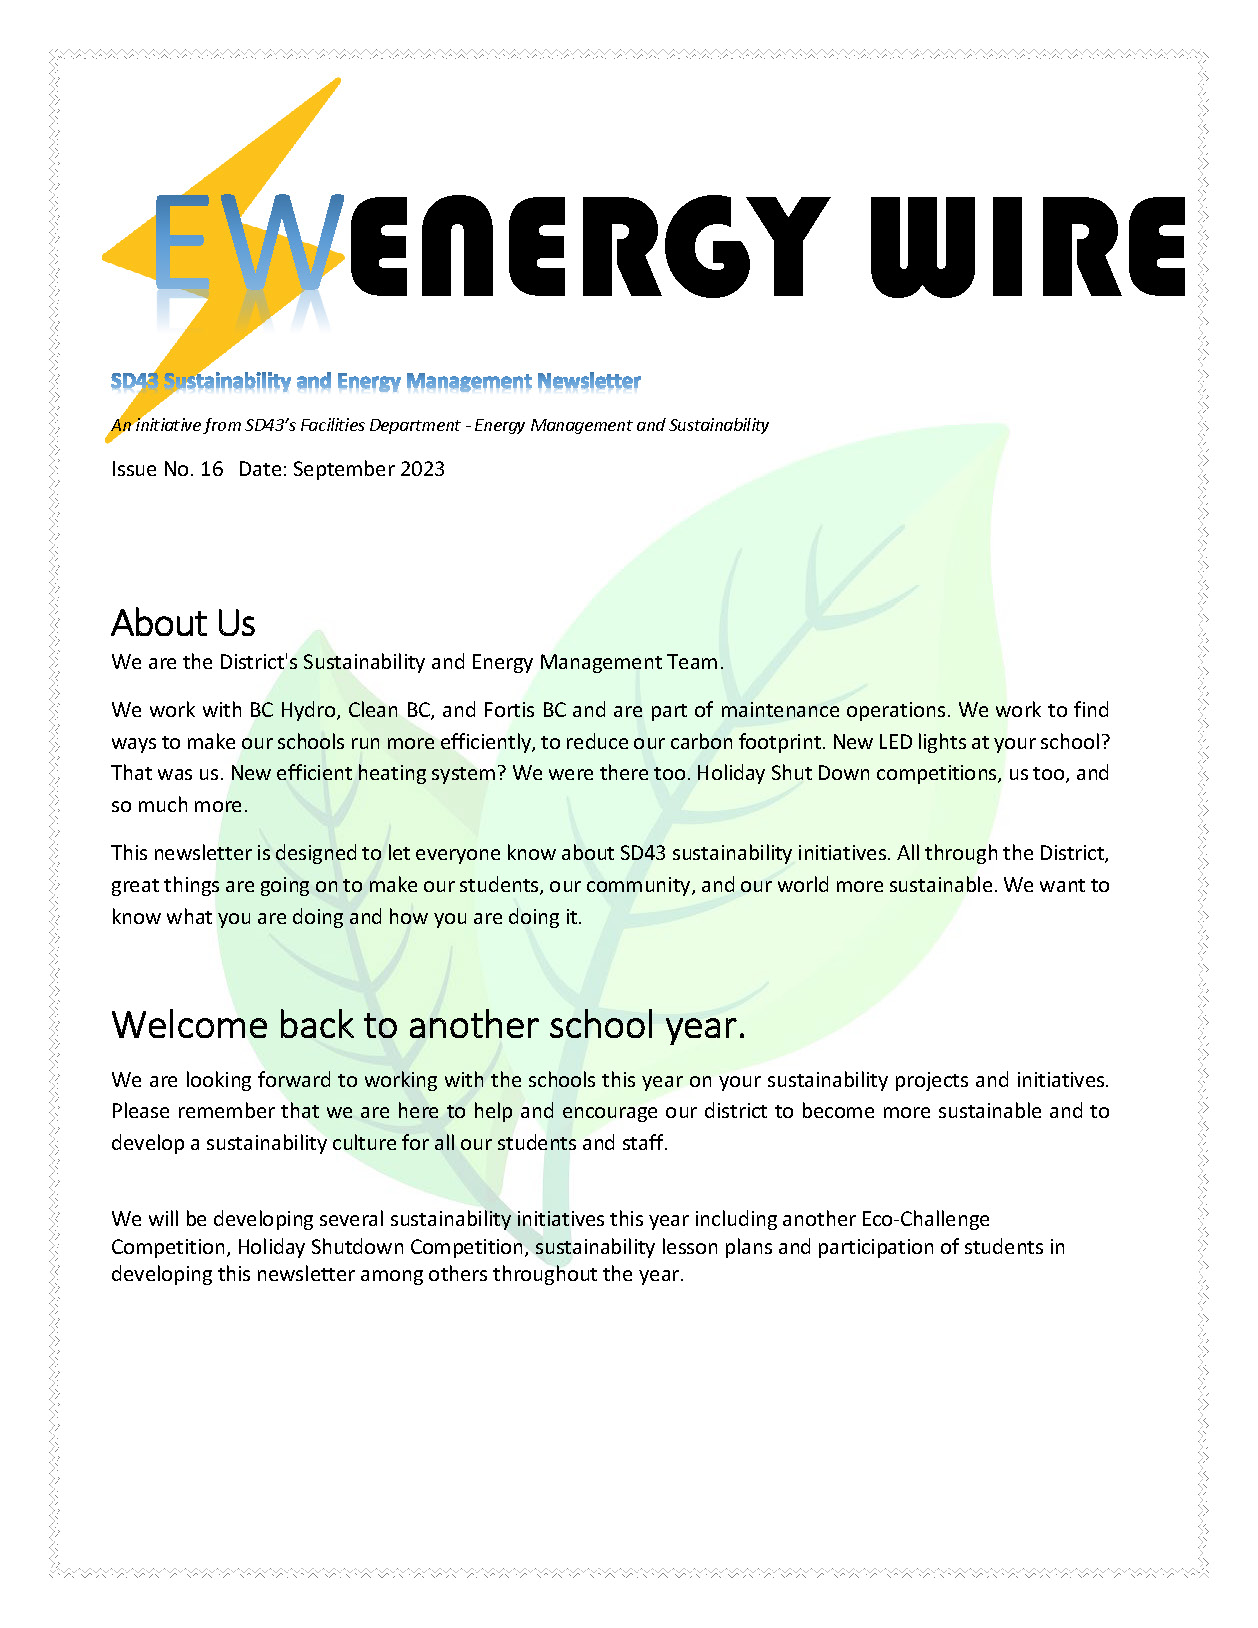 Sept 2023 - Energy Wire Newsletter_Page_1.jpg